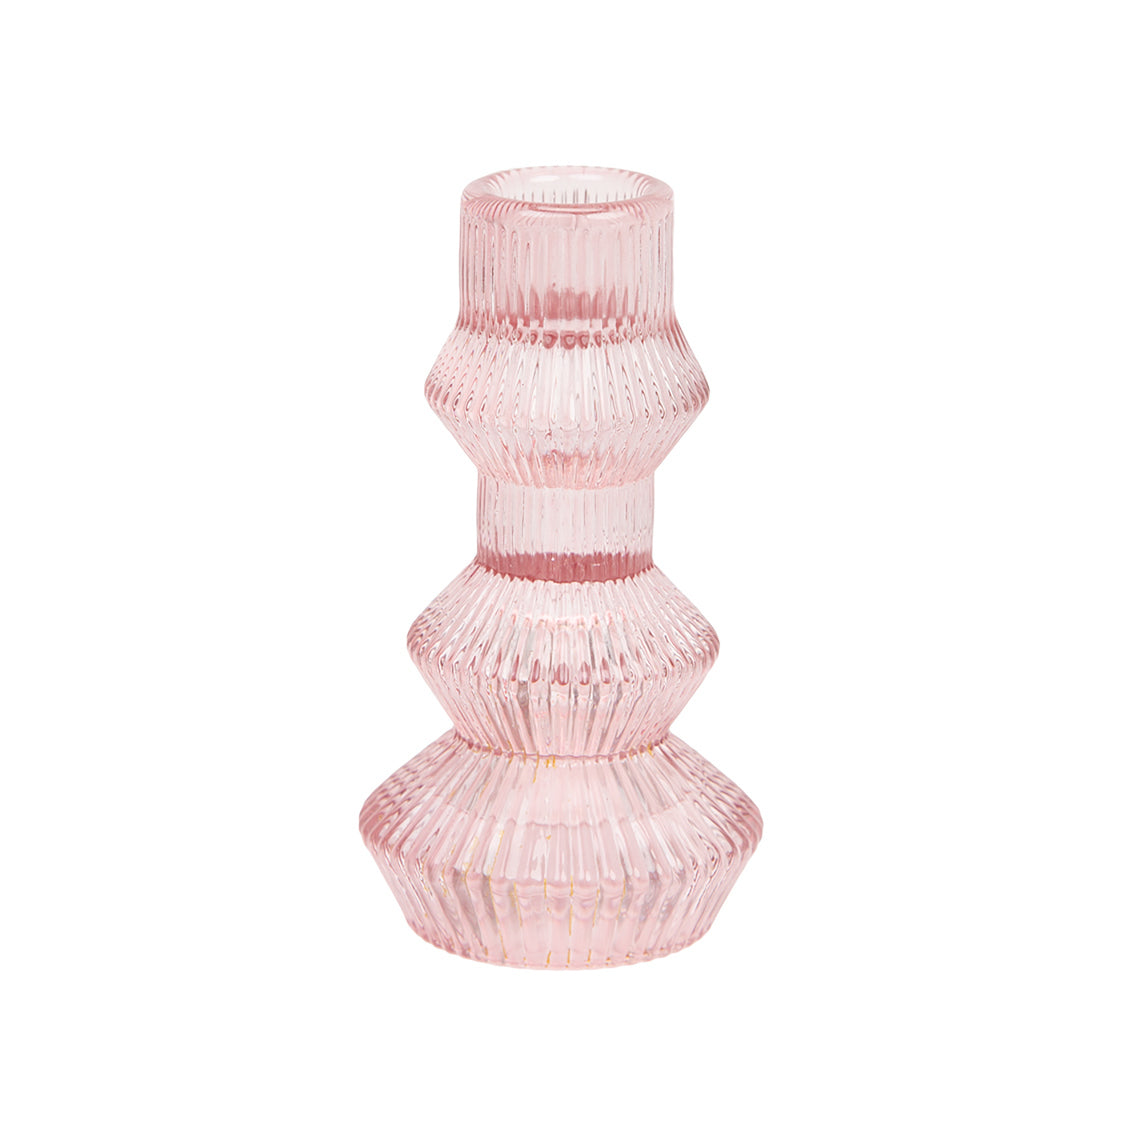 Ribbed Tiered Candle Holder | Pink - Poppy and Stella